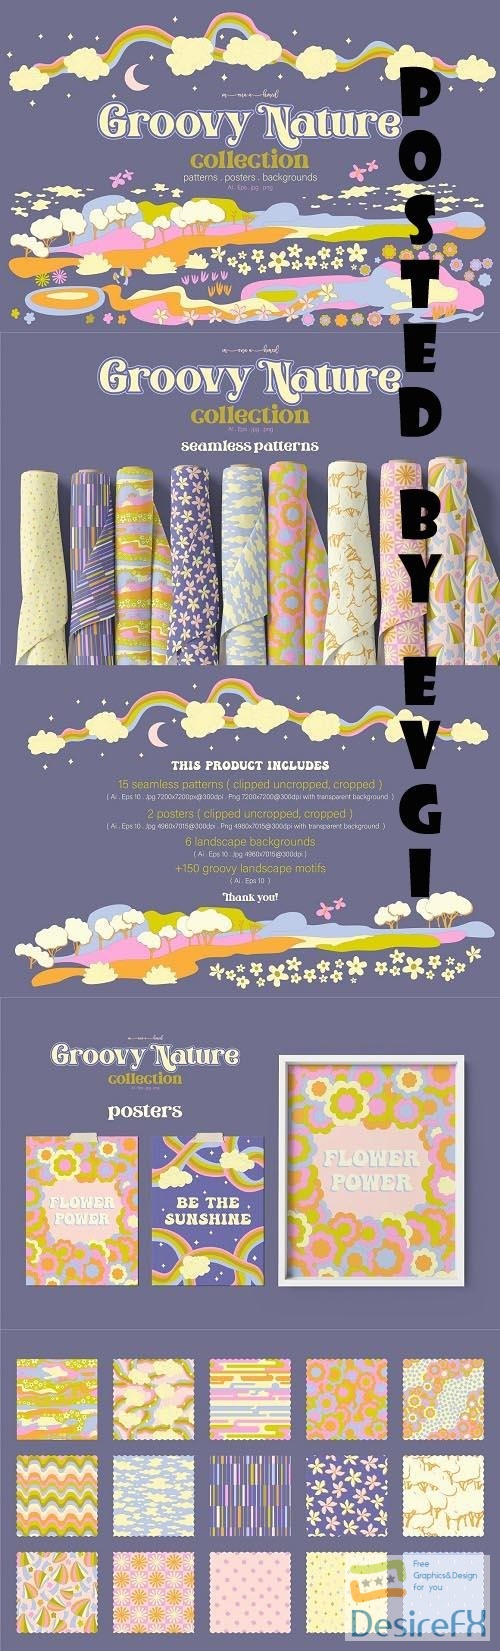 Groovy Nature Collection - 7156824